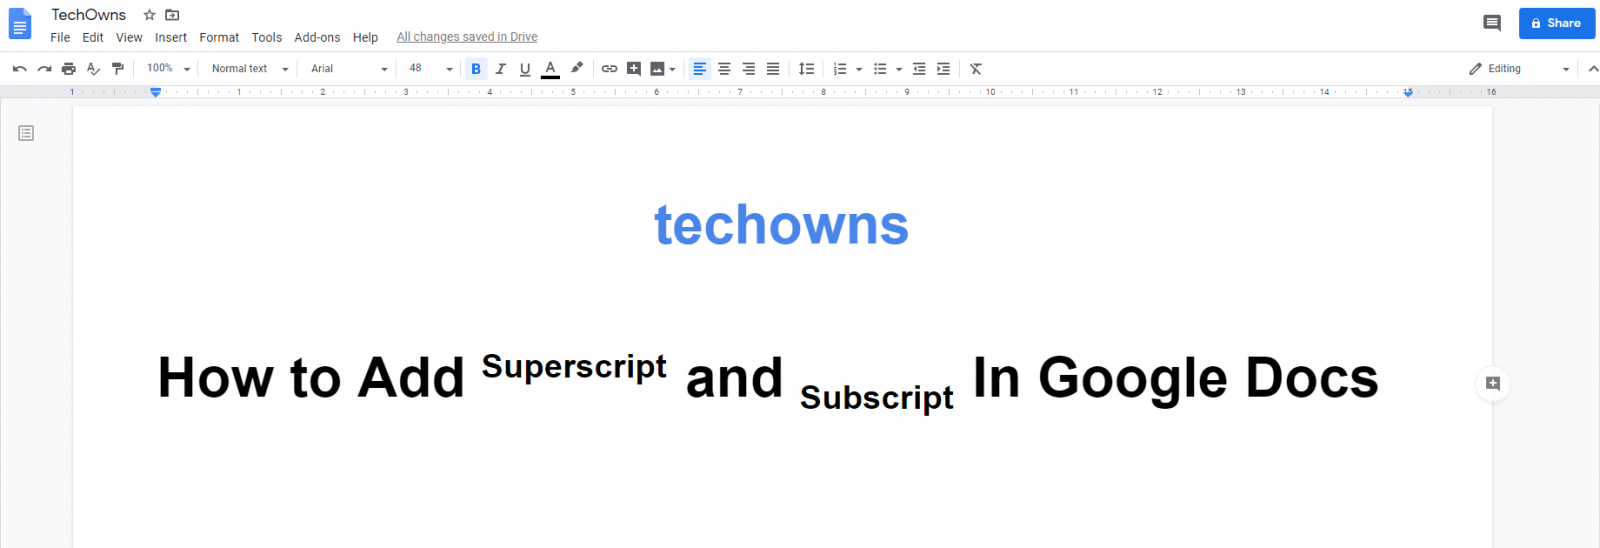 How to Superscript and Subscript In Google Docs [25 Easy Ways